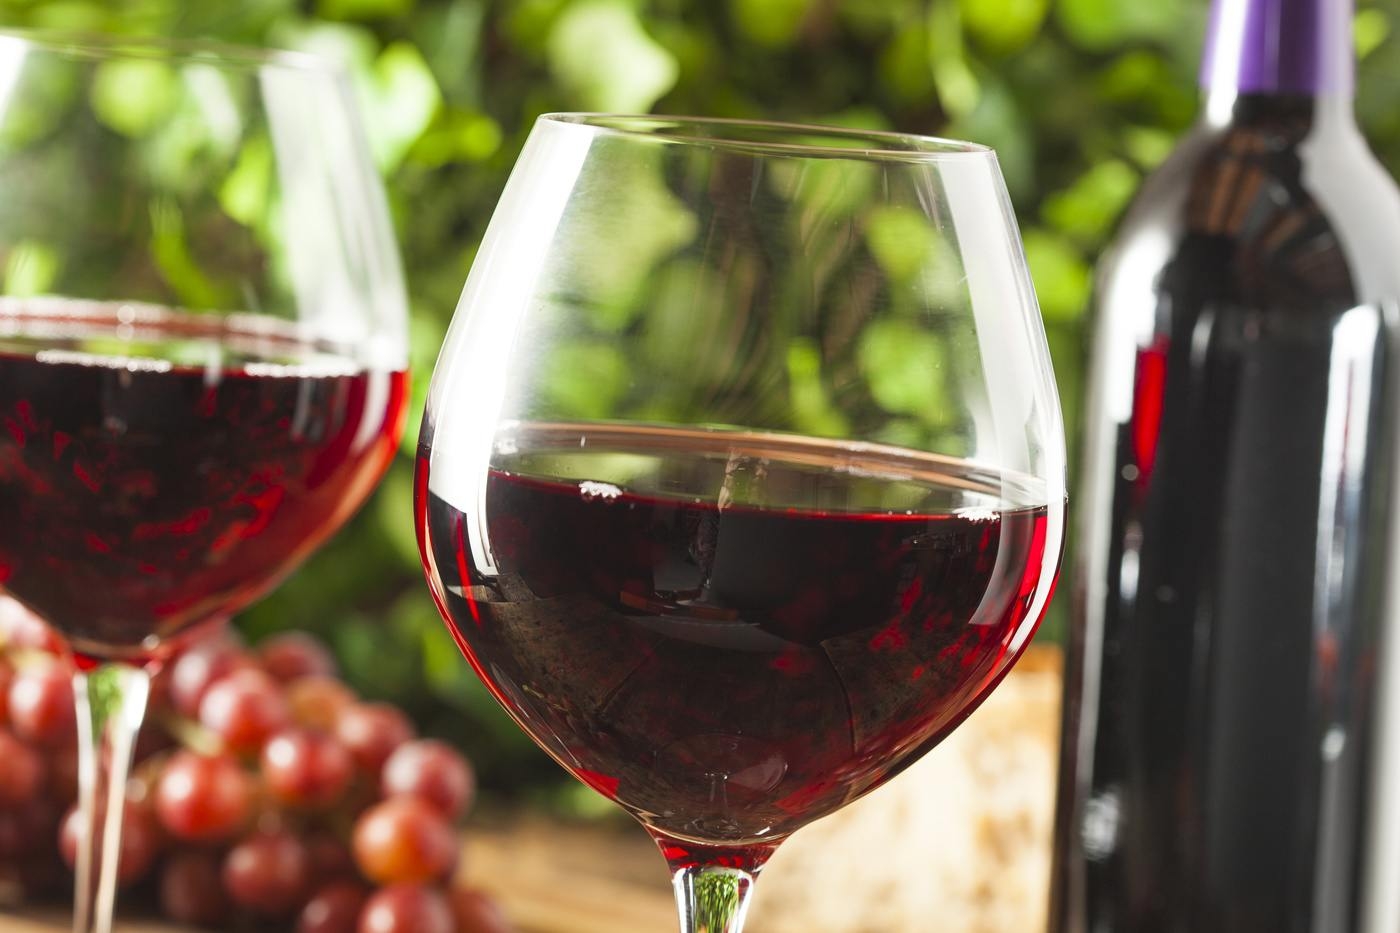 Does red wine help you live longer? Here’s what the science says.